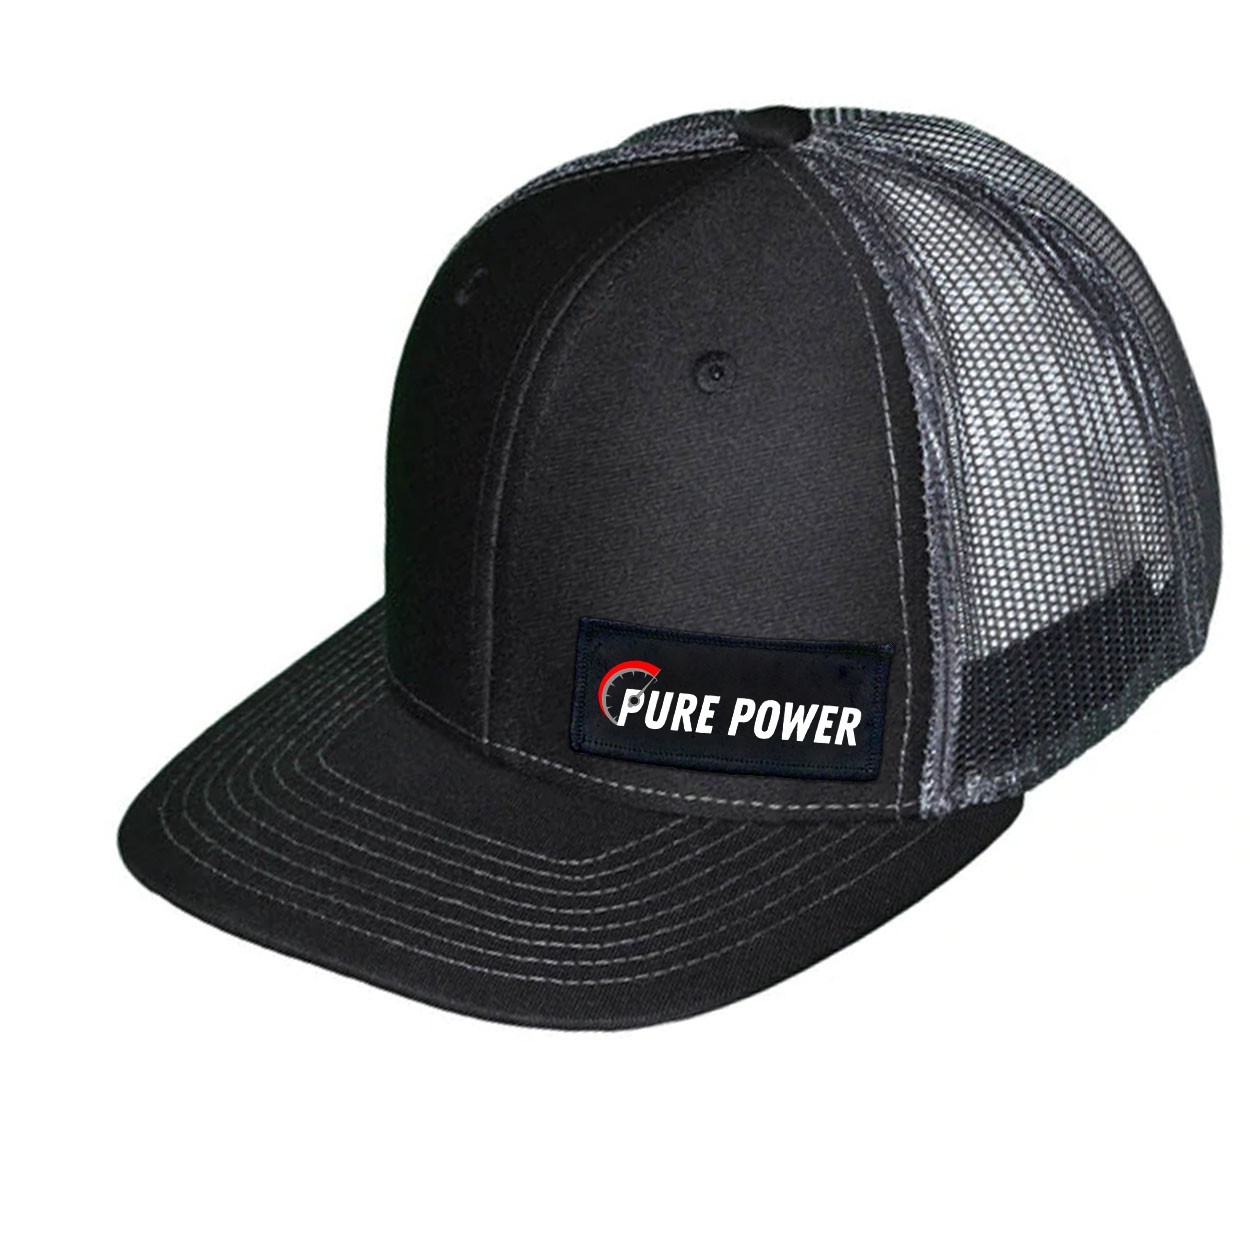 Ride Pure Power Logo Night Out Woven Patch Snapback Trucker Hat Black/Gray (White Logo)